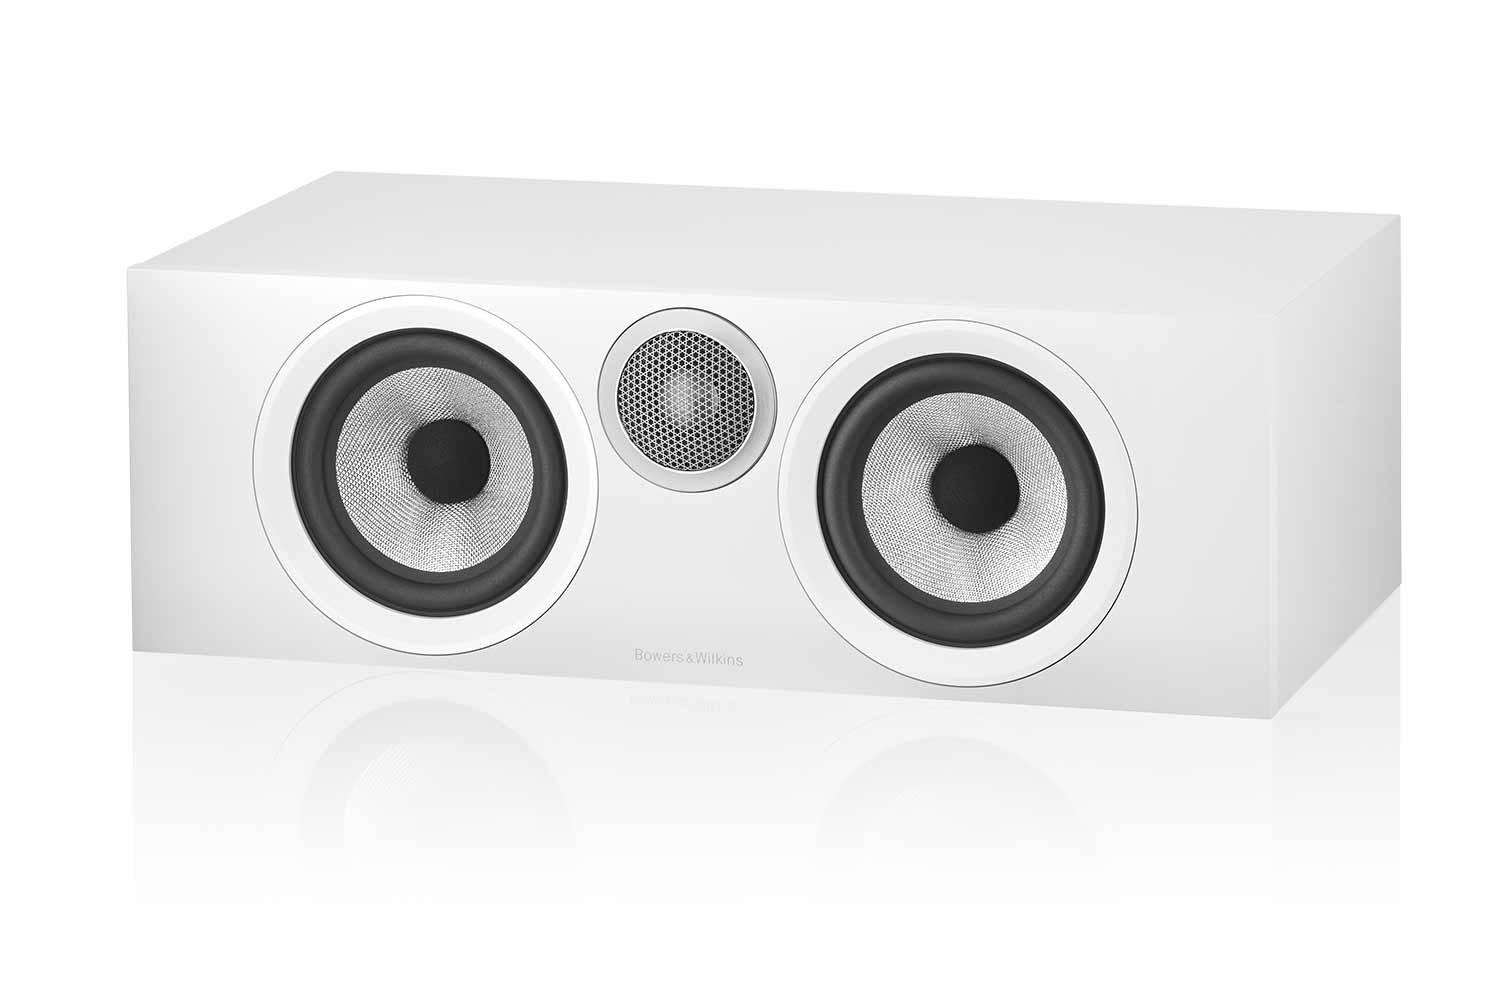 B&W Bowers & Wilkins HTM6 S3 Center